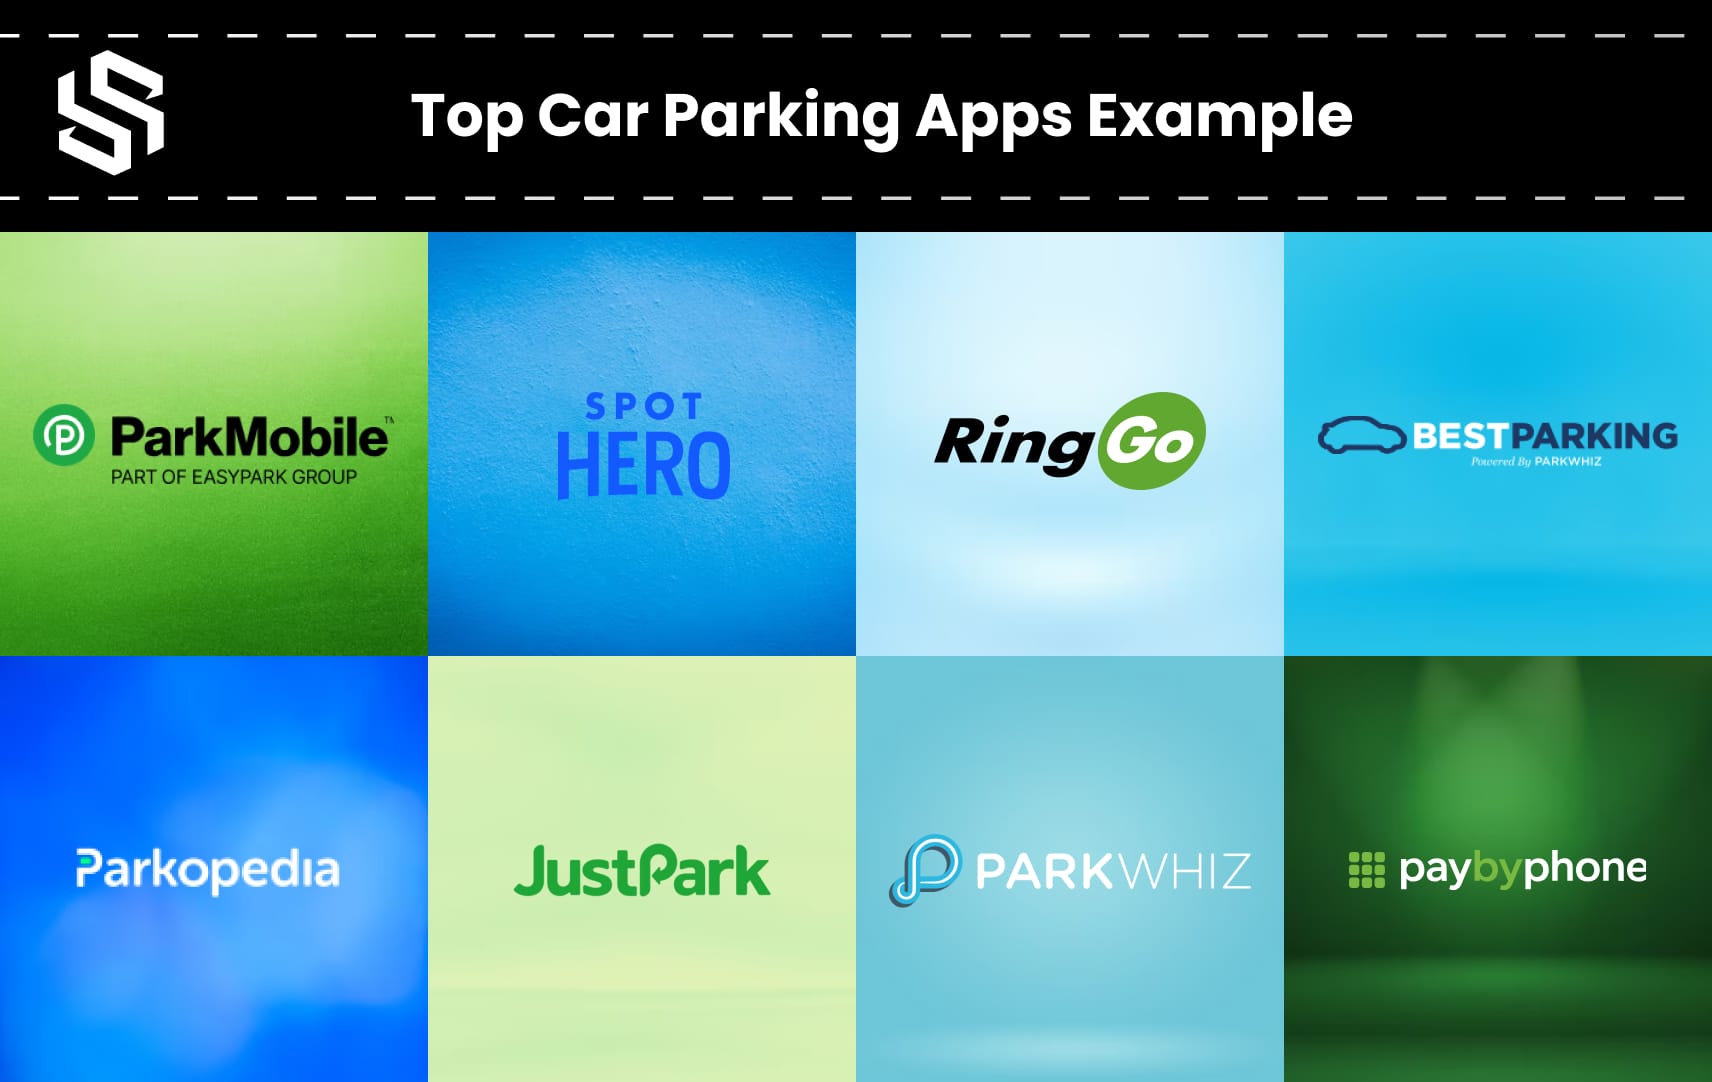 Top Car Parking Apps Example